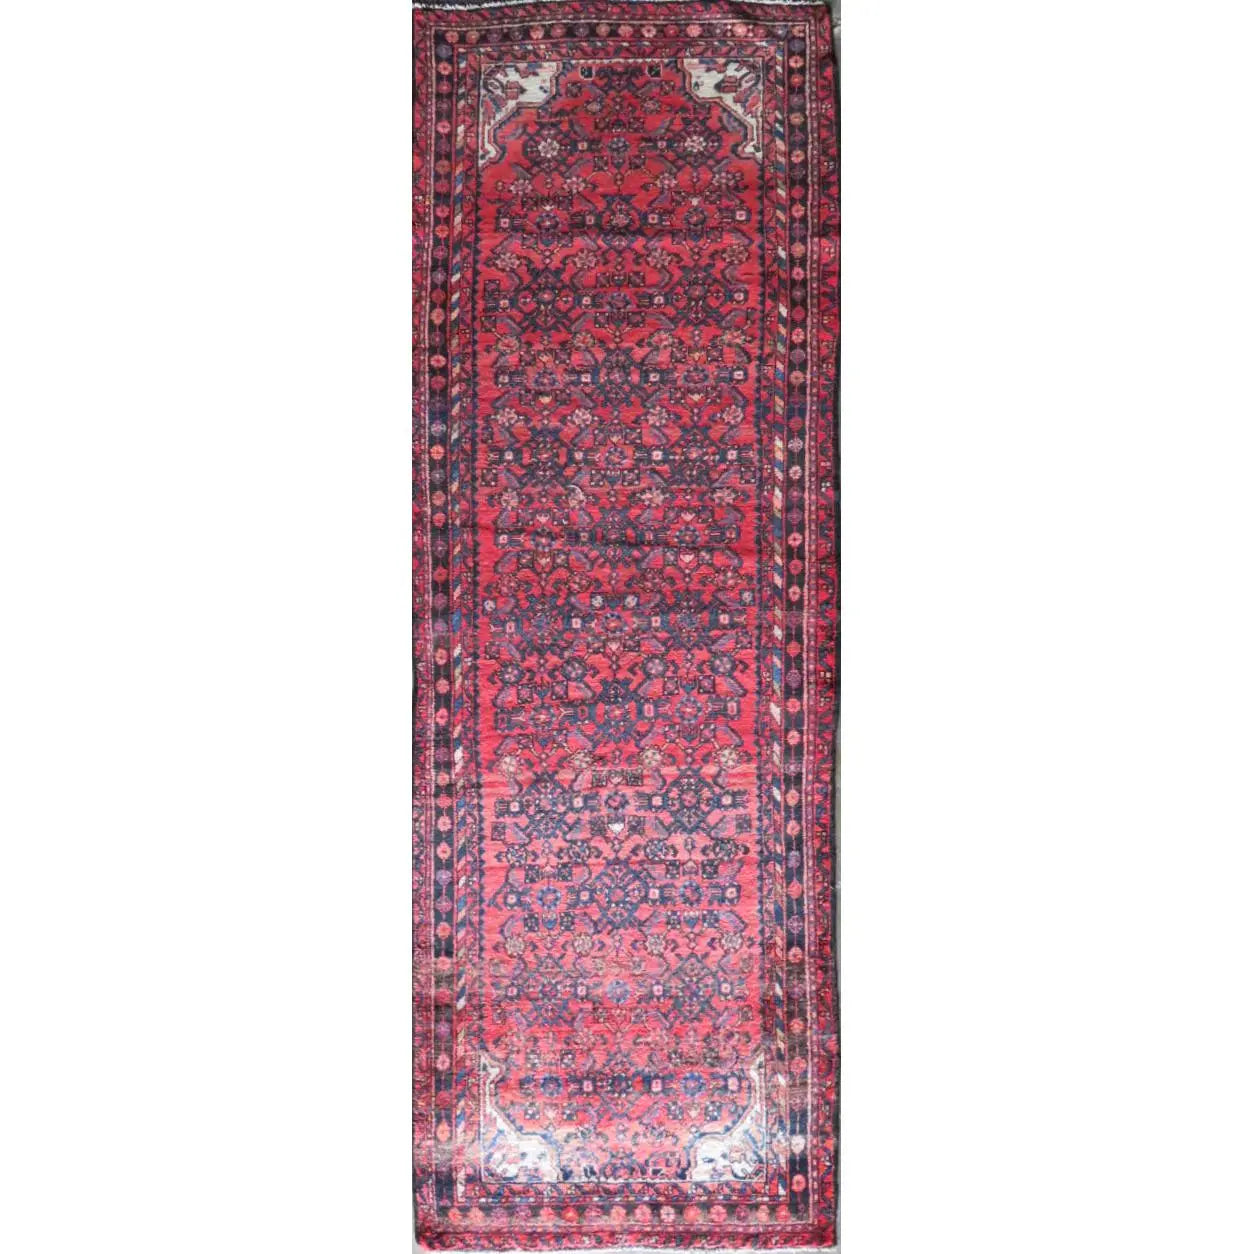 Hand-Knotted Persian Wool Rug _ Luxurious Vintage Design, 10'7" x 3'3", Artisan Crafted